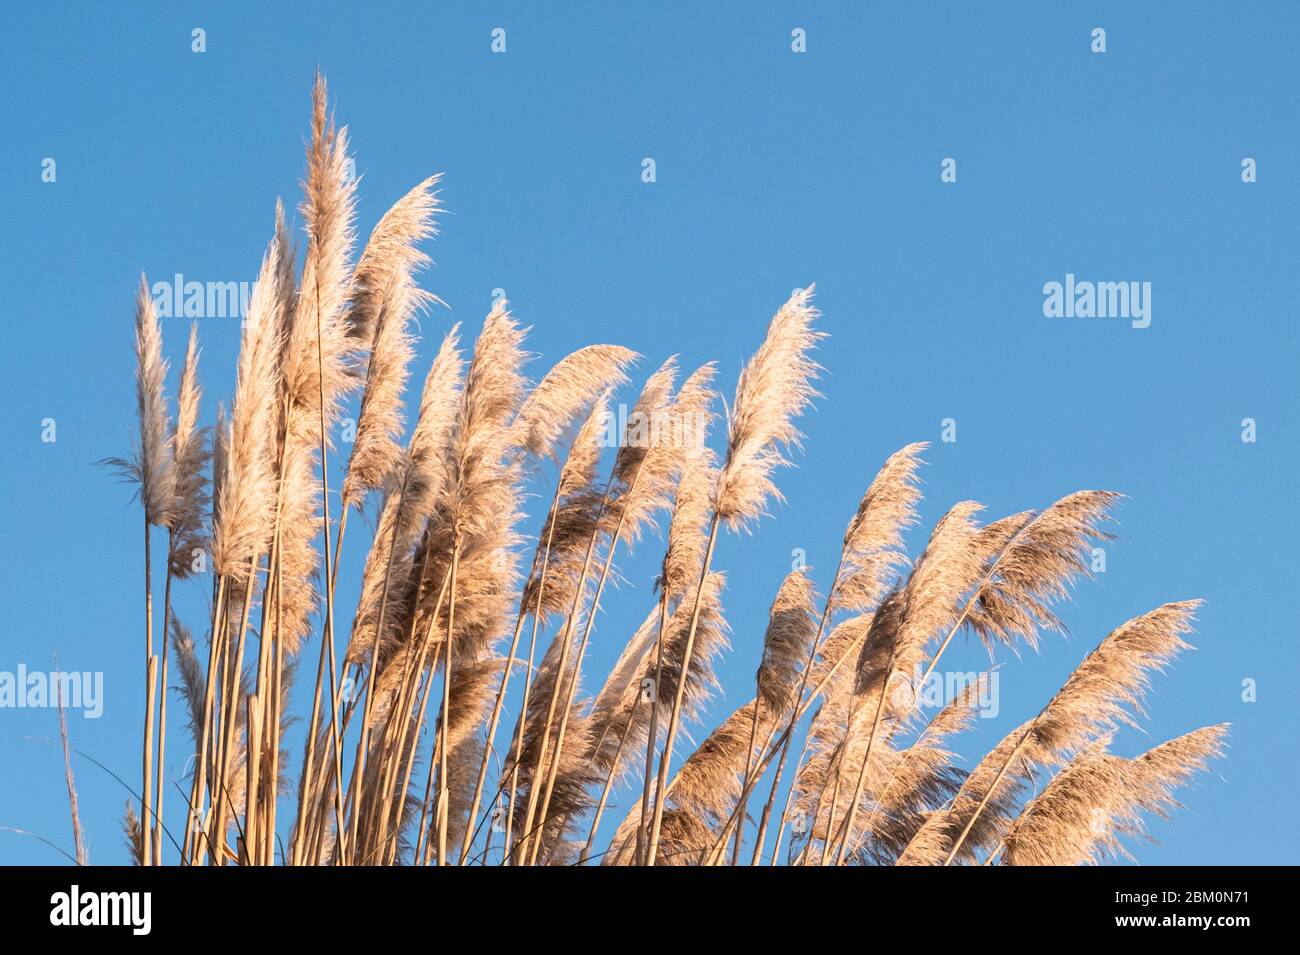 Tall grass blows in the wind against a blue sky, Penarth, Wales Stock Photo